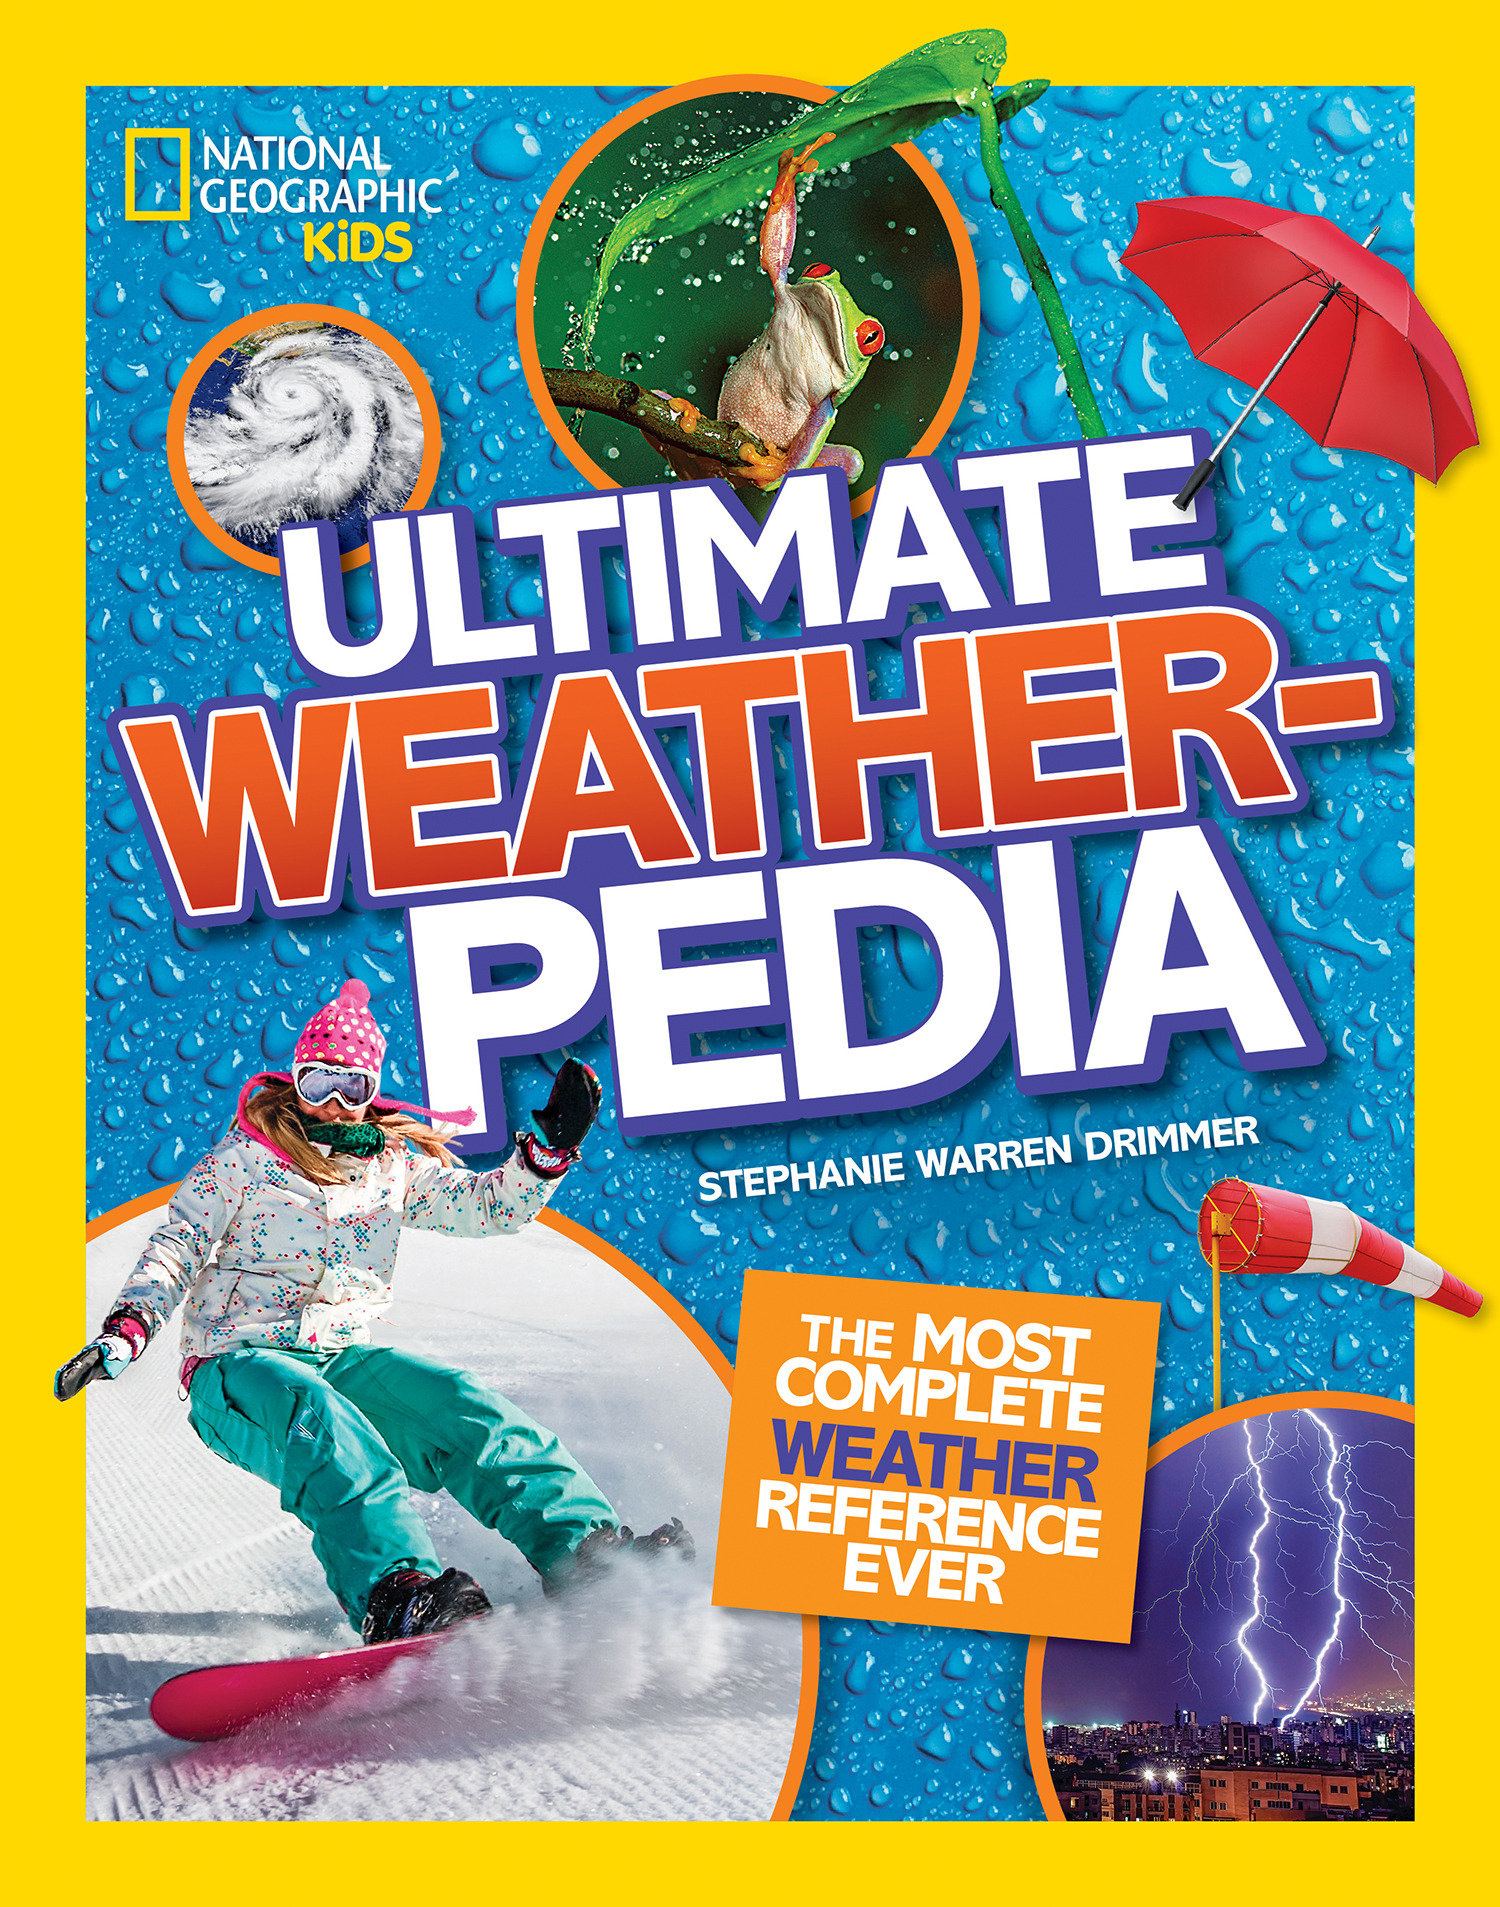 National Geographic Kids Ultimate Weatherpedia (Hardcover Book)